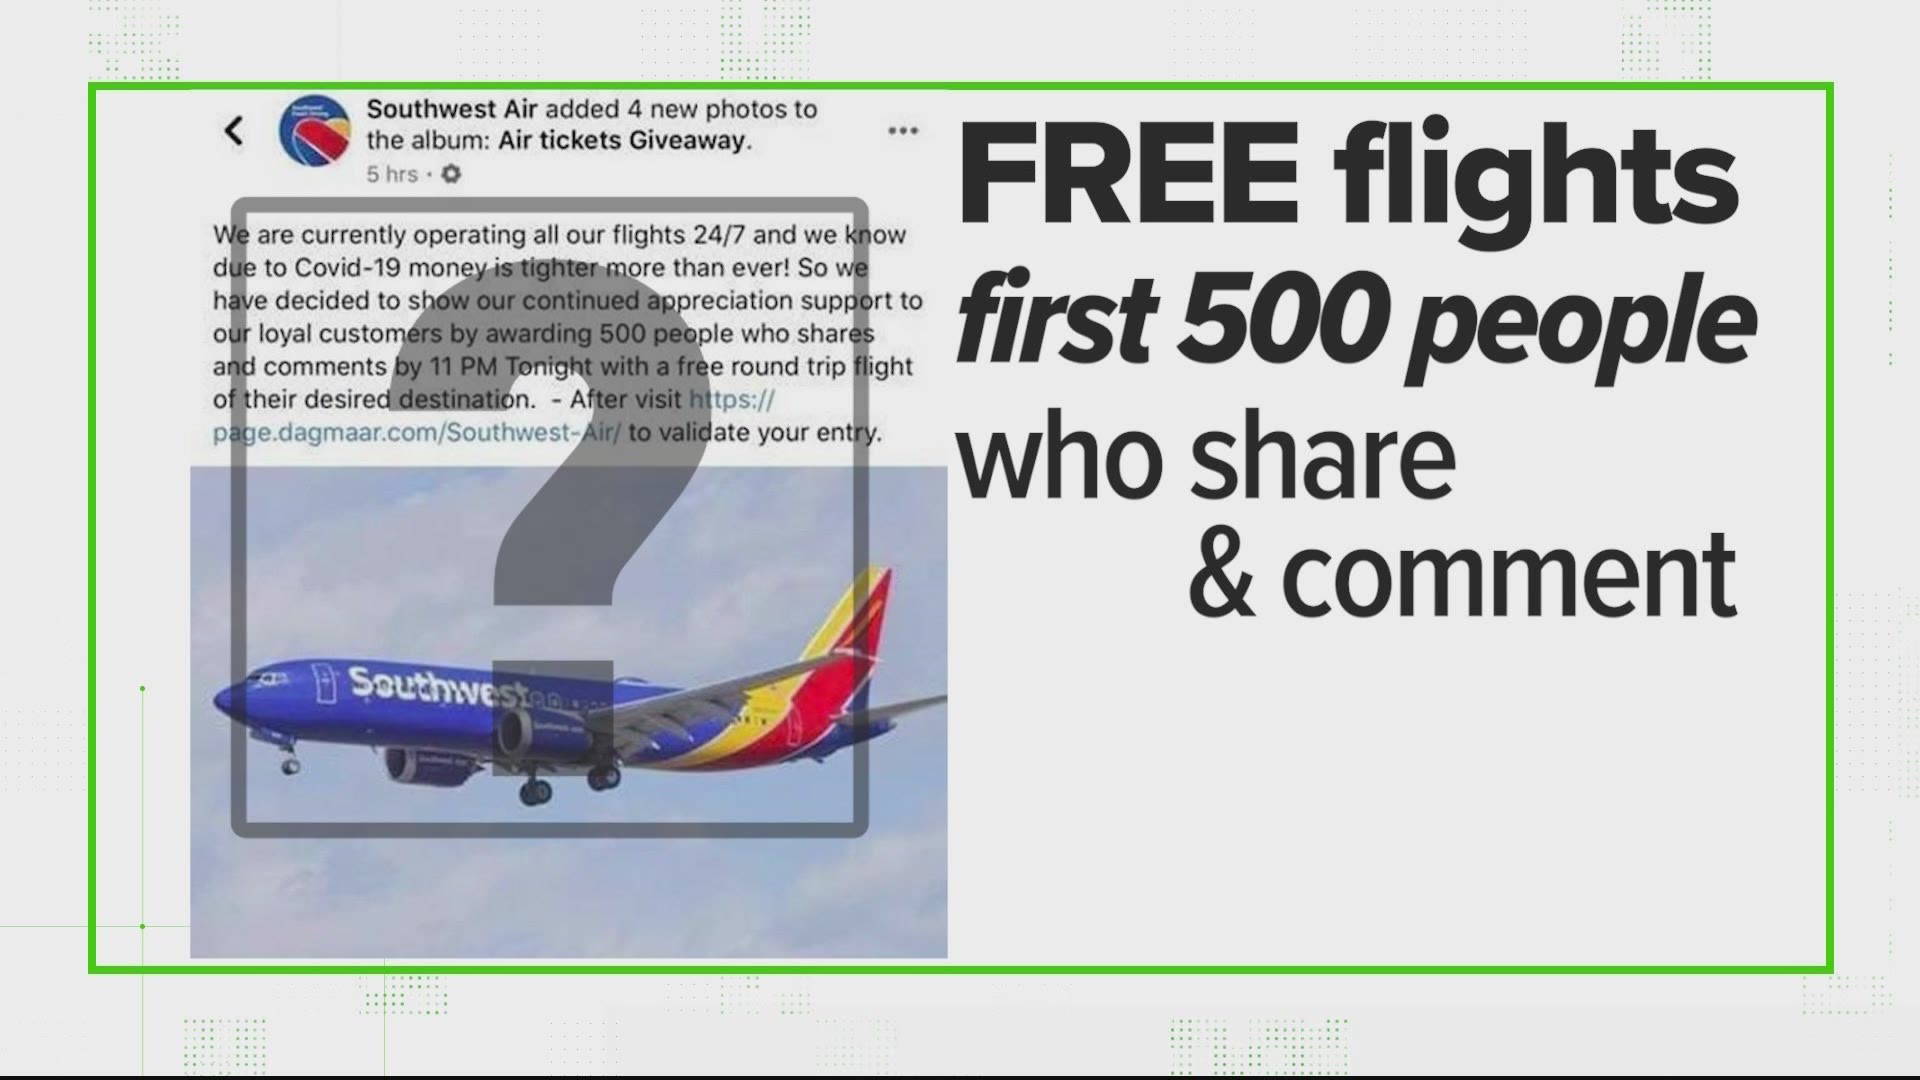 This viral post claims Southwest Airlines is giving away free tickets but it's a scam.